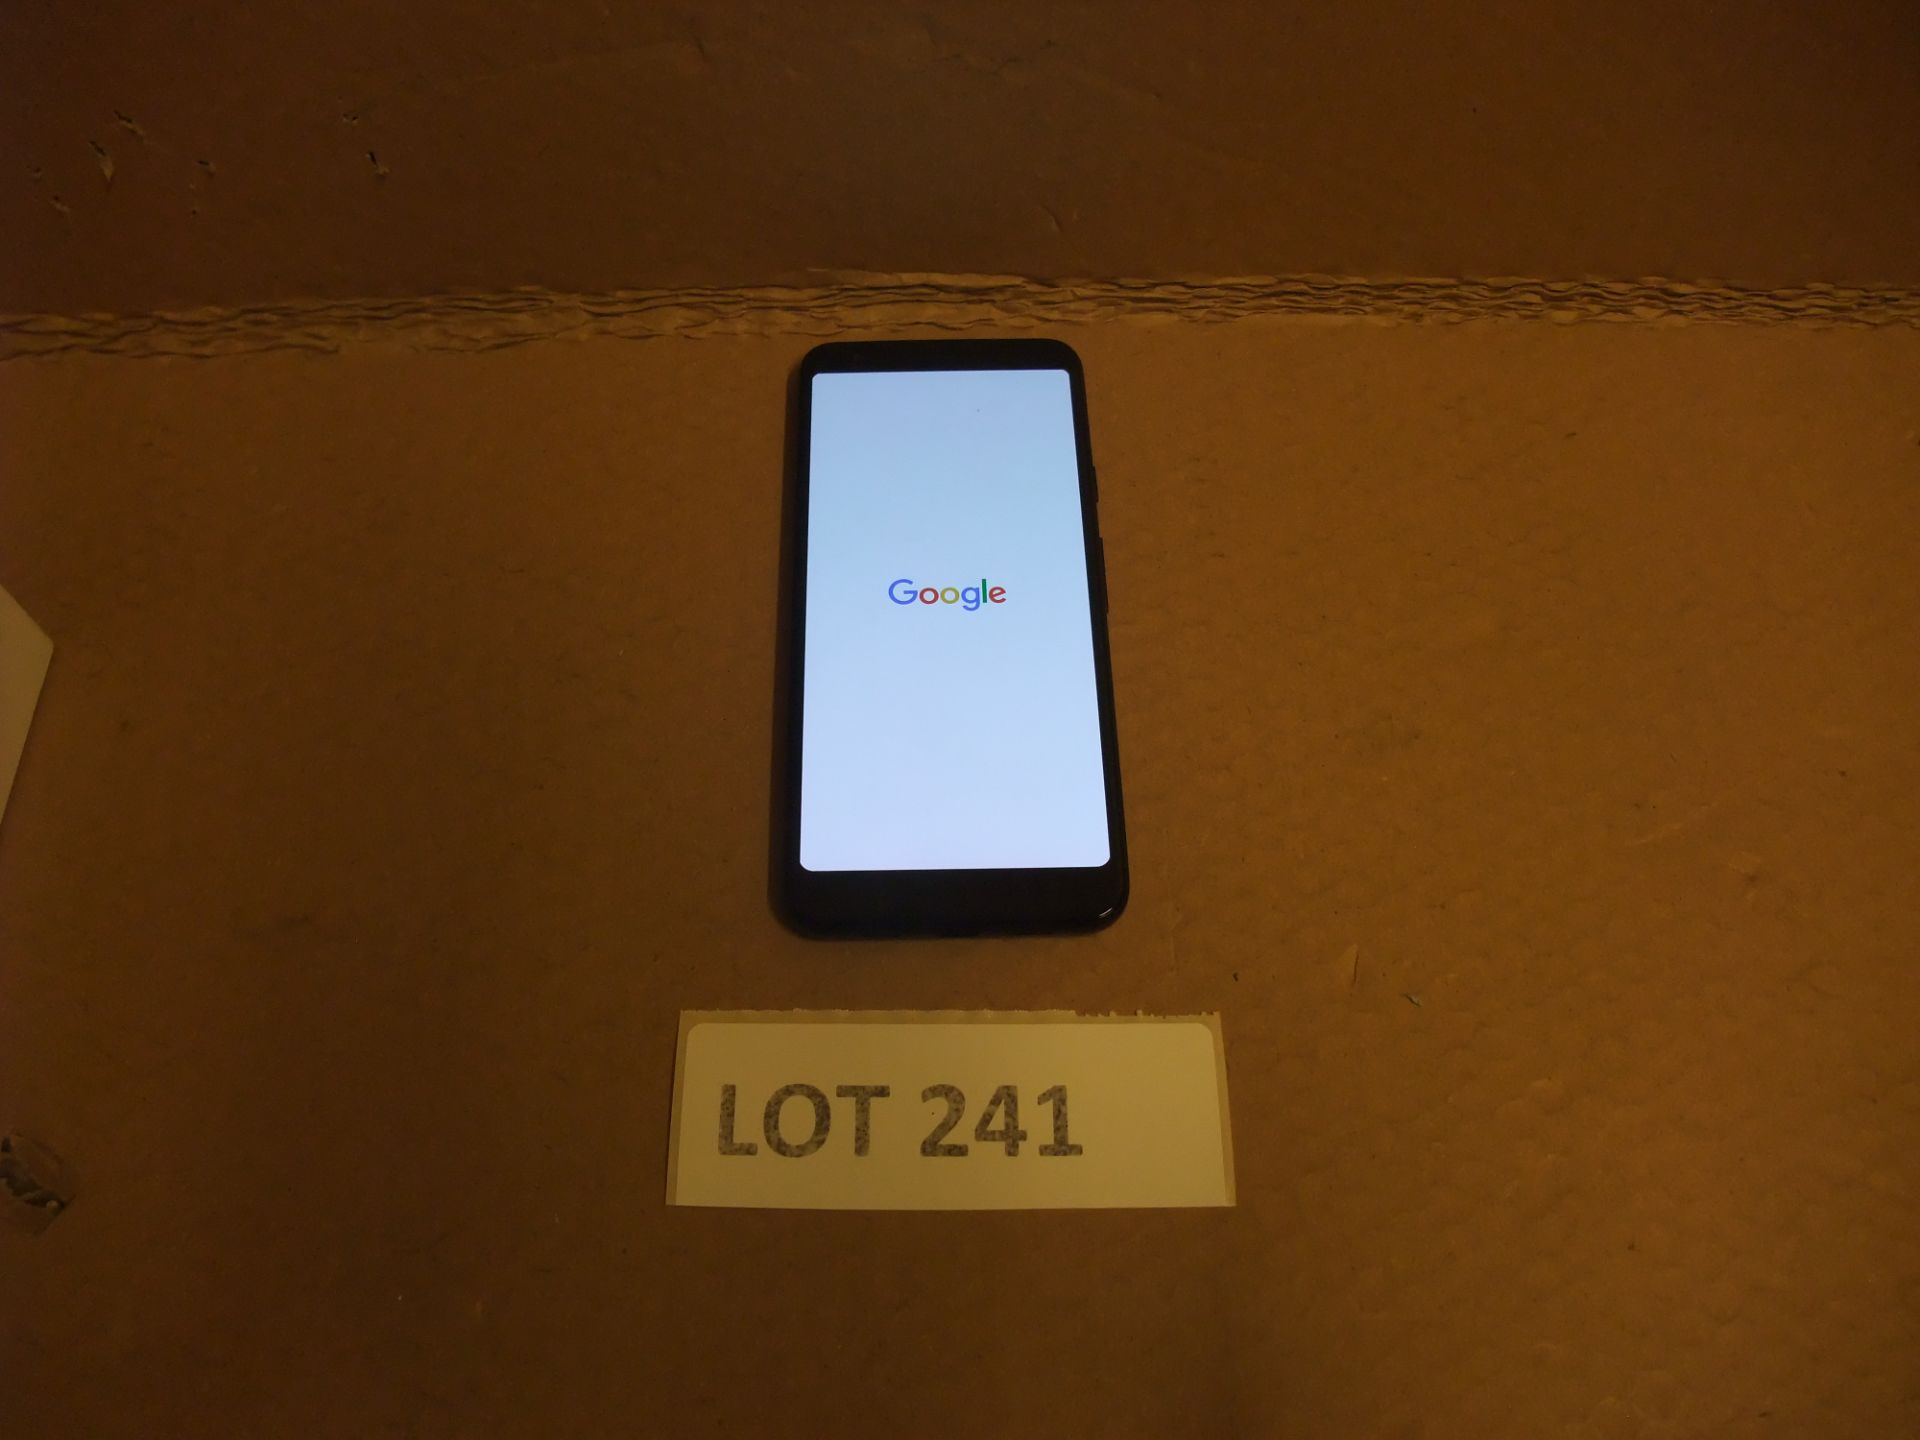 Google Pixel 3a (black) Android Phone - 64GbPlease read the following important notes:- All lots - Image 2 of 3